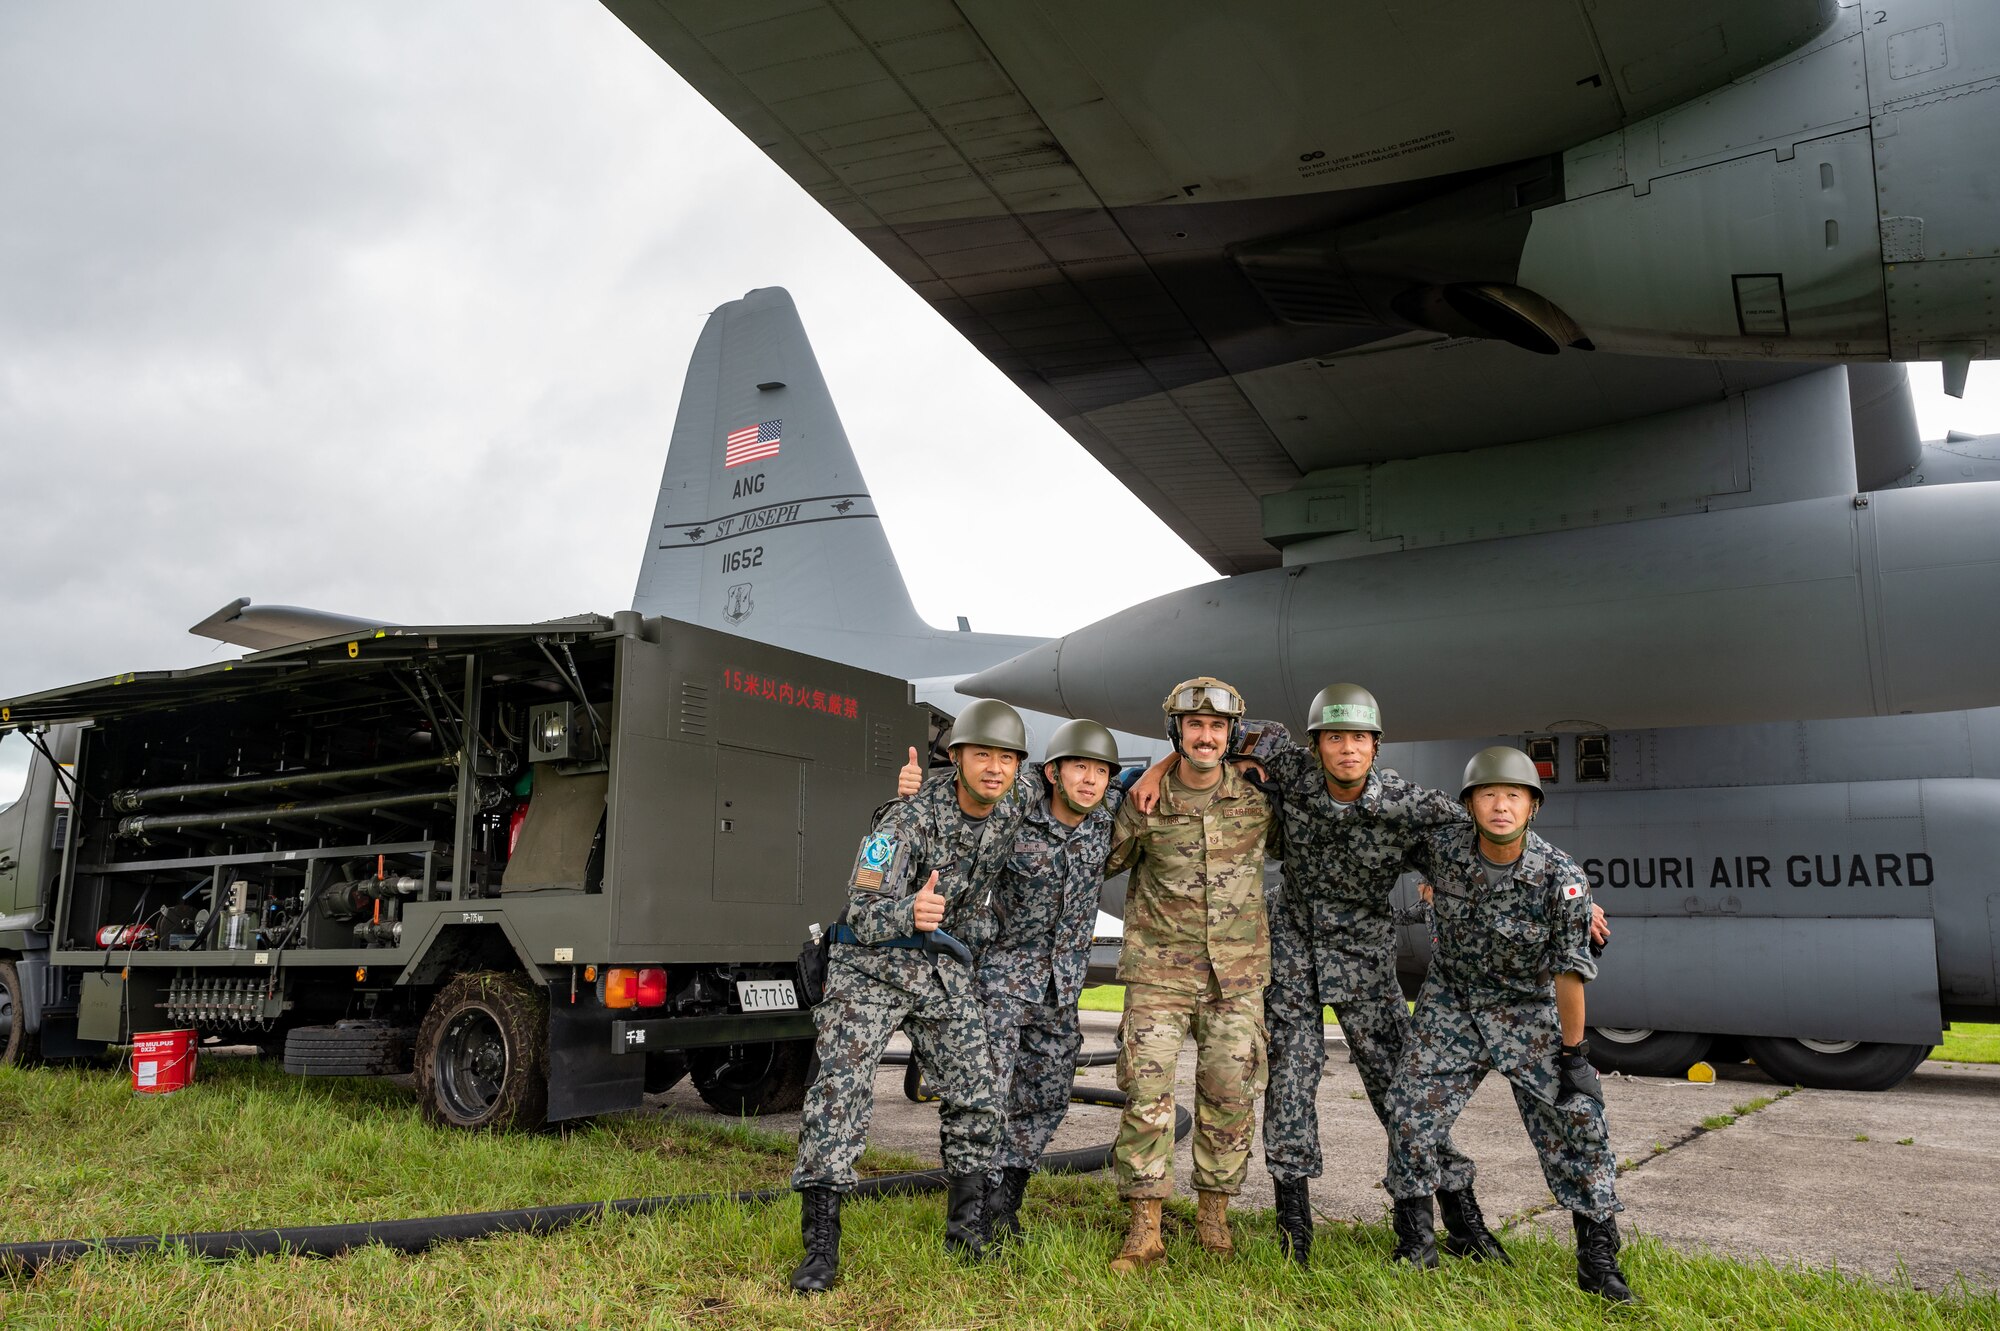 Tech. Sgt. Connor Starr, 821 Contingency Response Squadron fuels UTC lead, poses for a photo with Japanese Air Self-Defense Force members after a successful specialized fuel operations on a C-130 Hercules in support of Mobility Guardian 2023 at  Yakumo sub-base, Japan, July 13, 2023. A multilateral endeavor, MG23 features seven participating countries - Australia, Canada, France, Japan, New Zealand, United Kingdom, and the United States - Operating approximately 70 mobility aircraft across multiple locations spanning a 3,000 miles exercise are from July 5 through July 21.